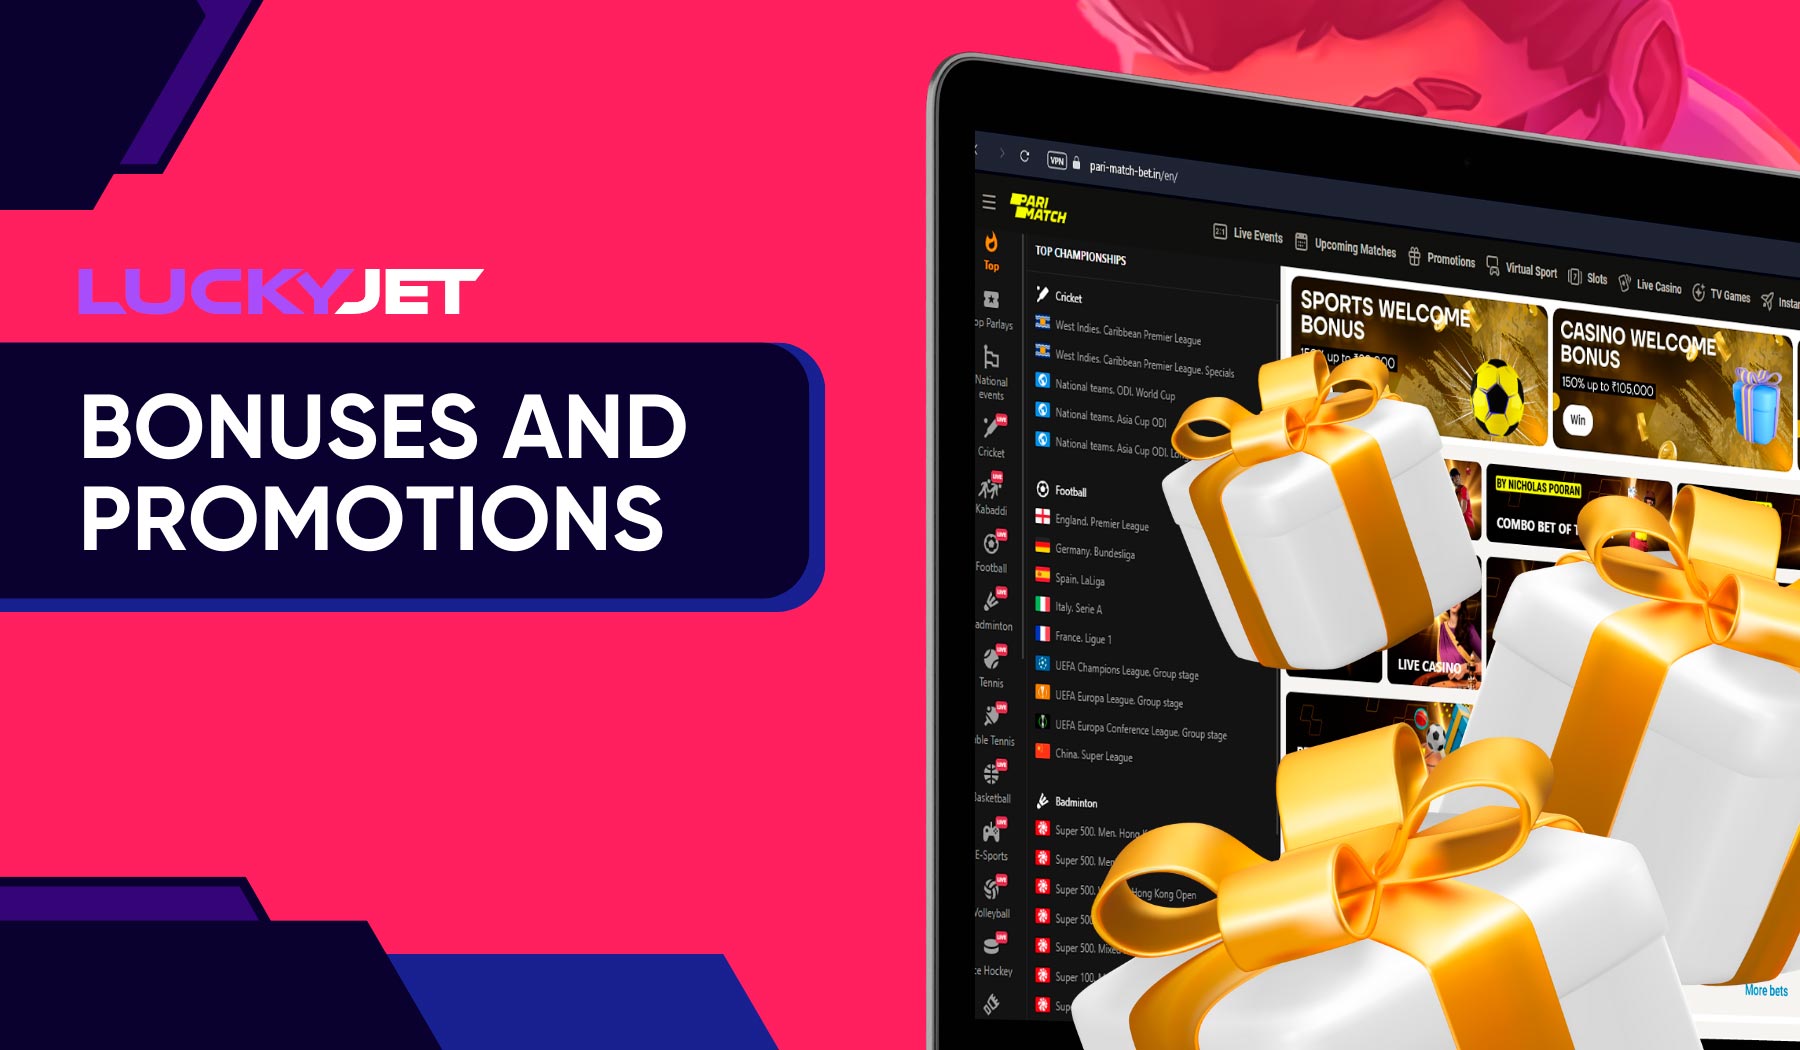 Lucky Jet at Parimatch has tempting bonuses and promotions specially designed for Indian players